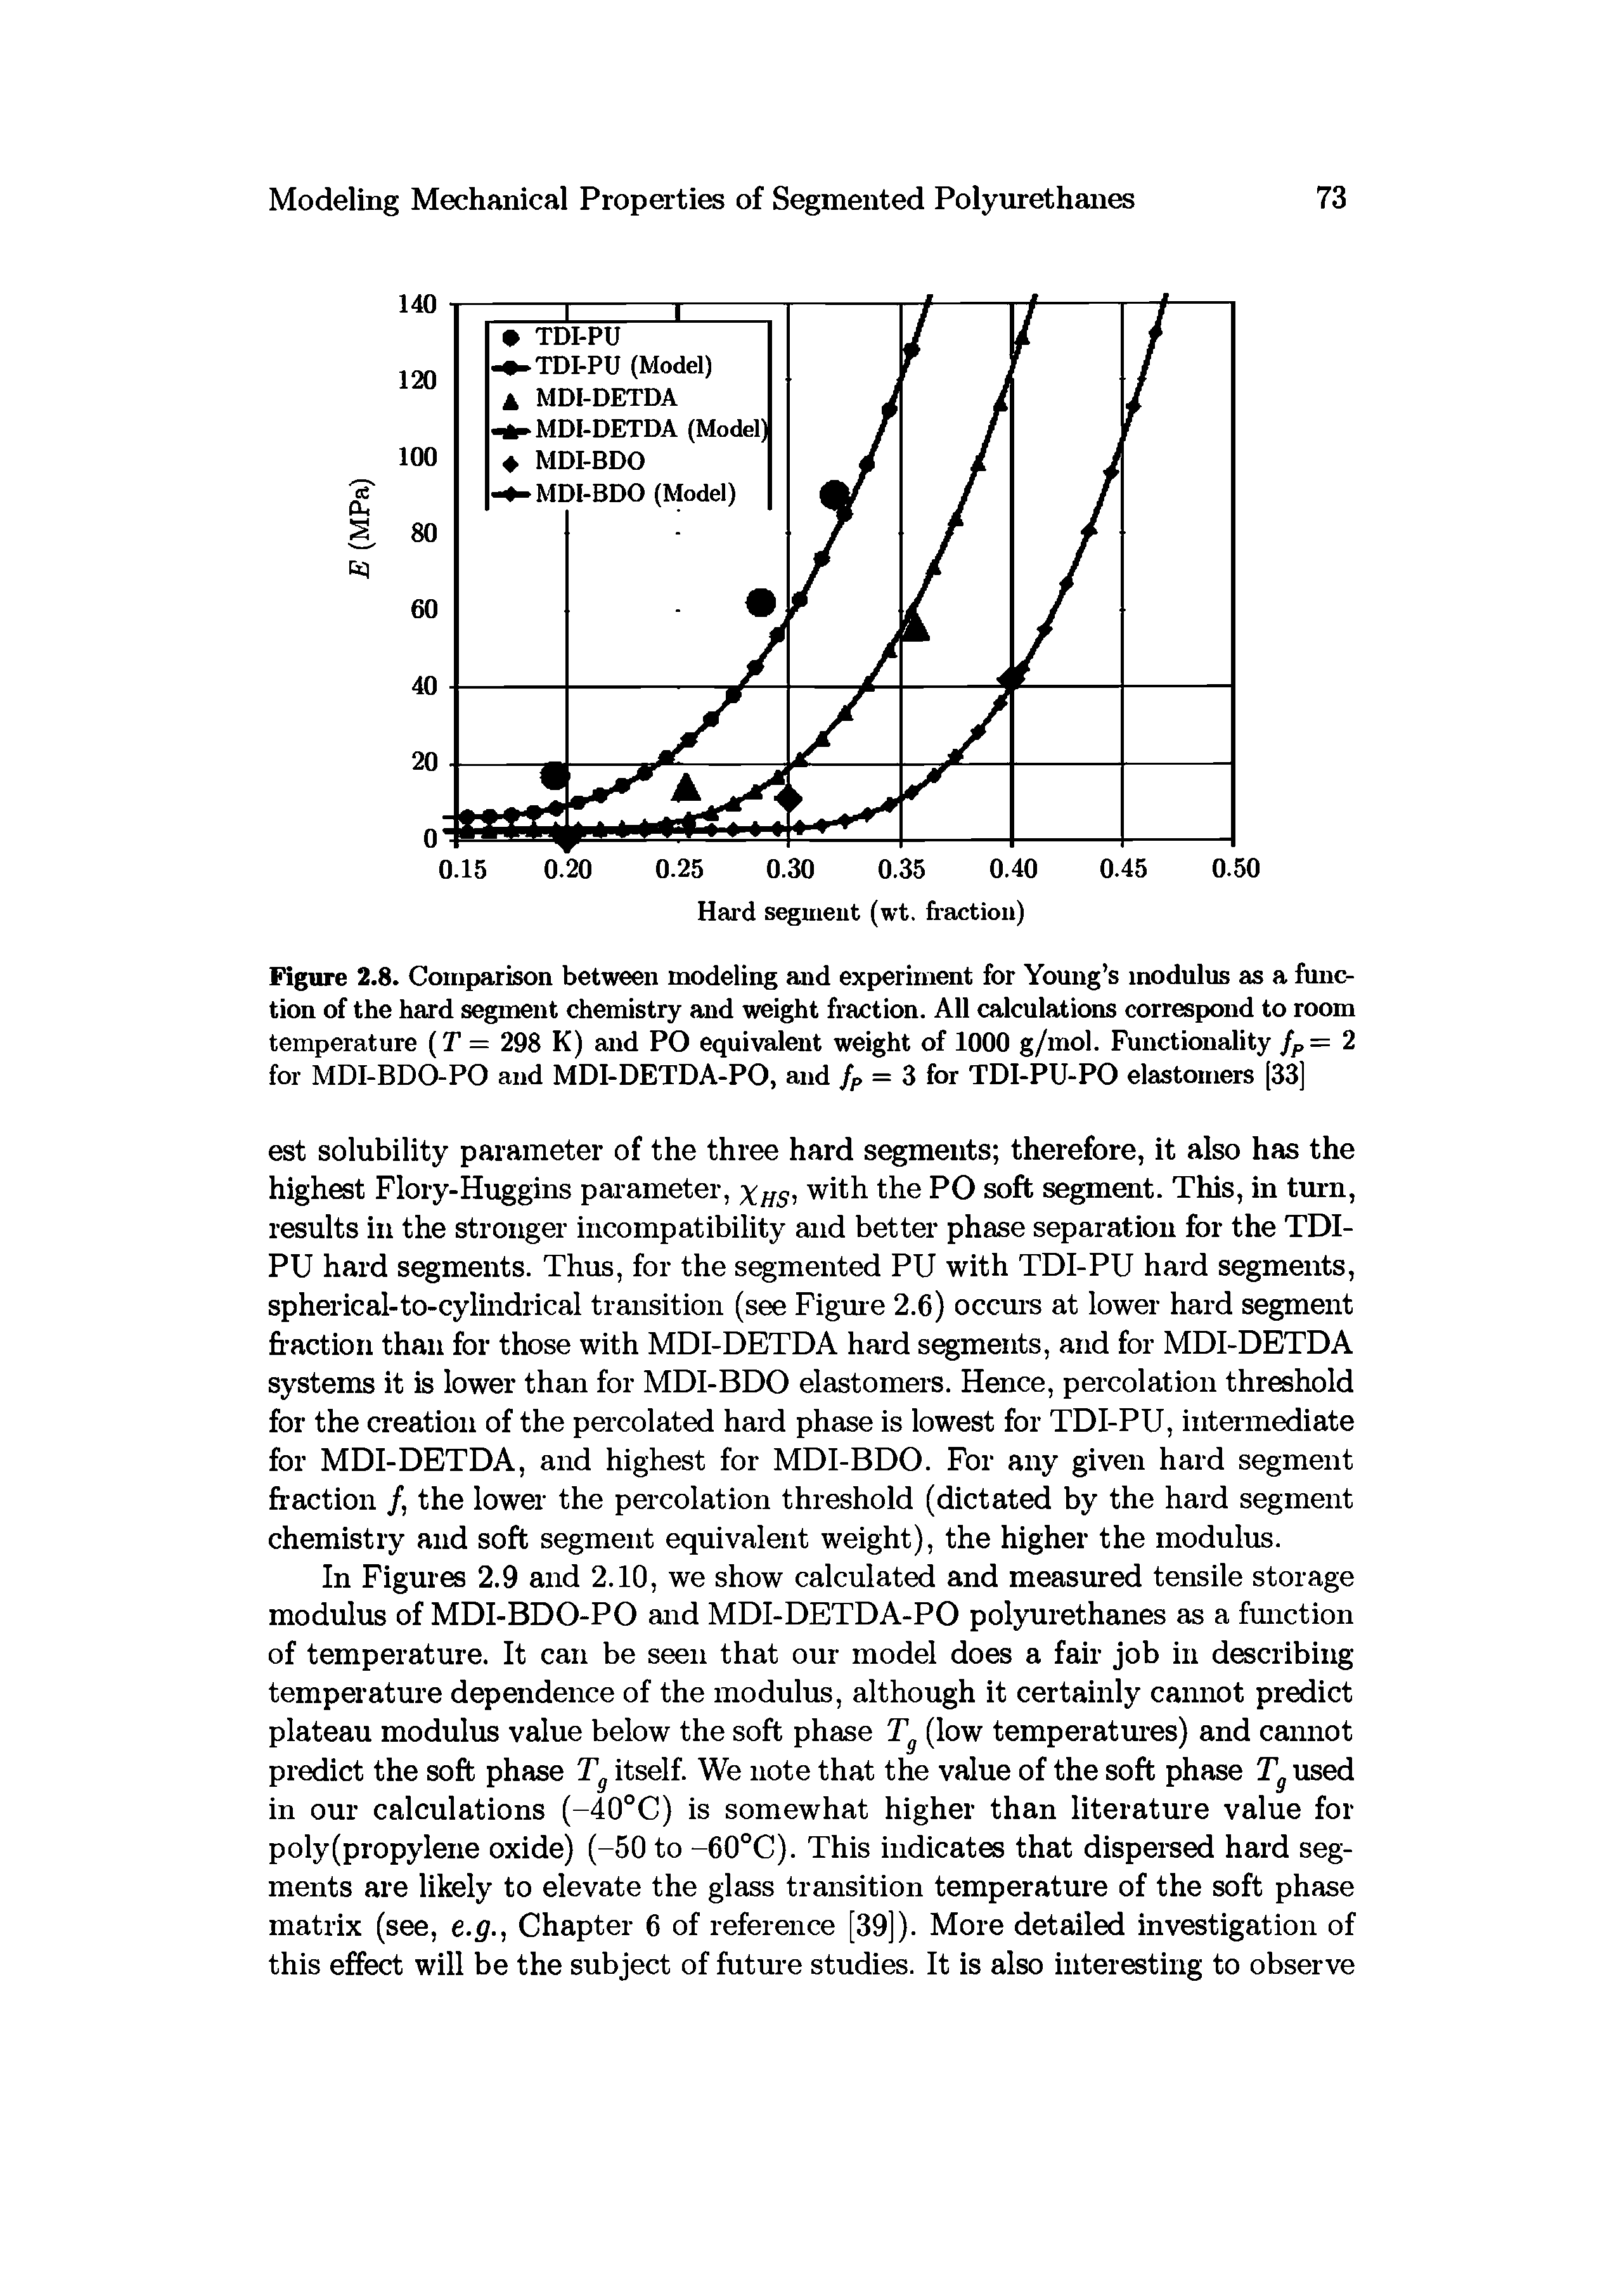 Figure 2.8. Comparison between modeling and experiment for Young s modulus as a function of the hard segment chemistry and weight fraction. All calculations correspond to room temperature (T = 298 K) and PO equivalent weight of 1000 g/inol. Functionality fp= 2 for MDI-BDO-PO and MDI-DETDA-PO, and fp = Z for TDI-PU-PO elastomers [33]...